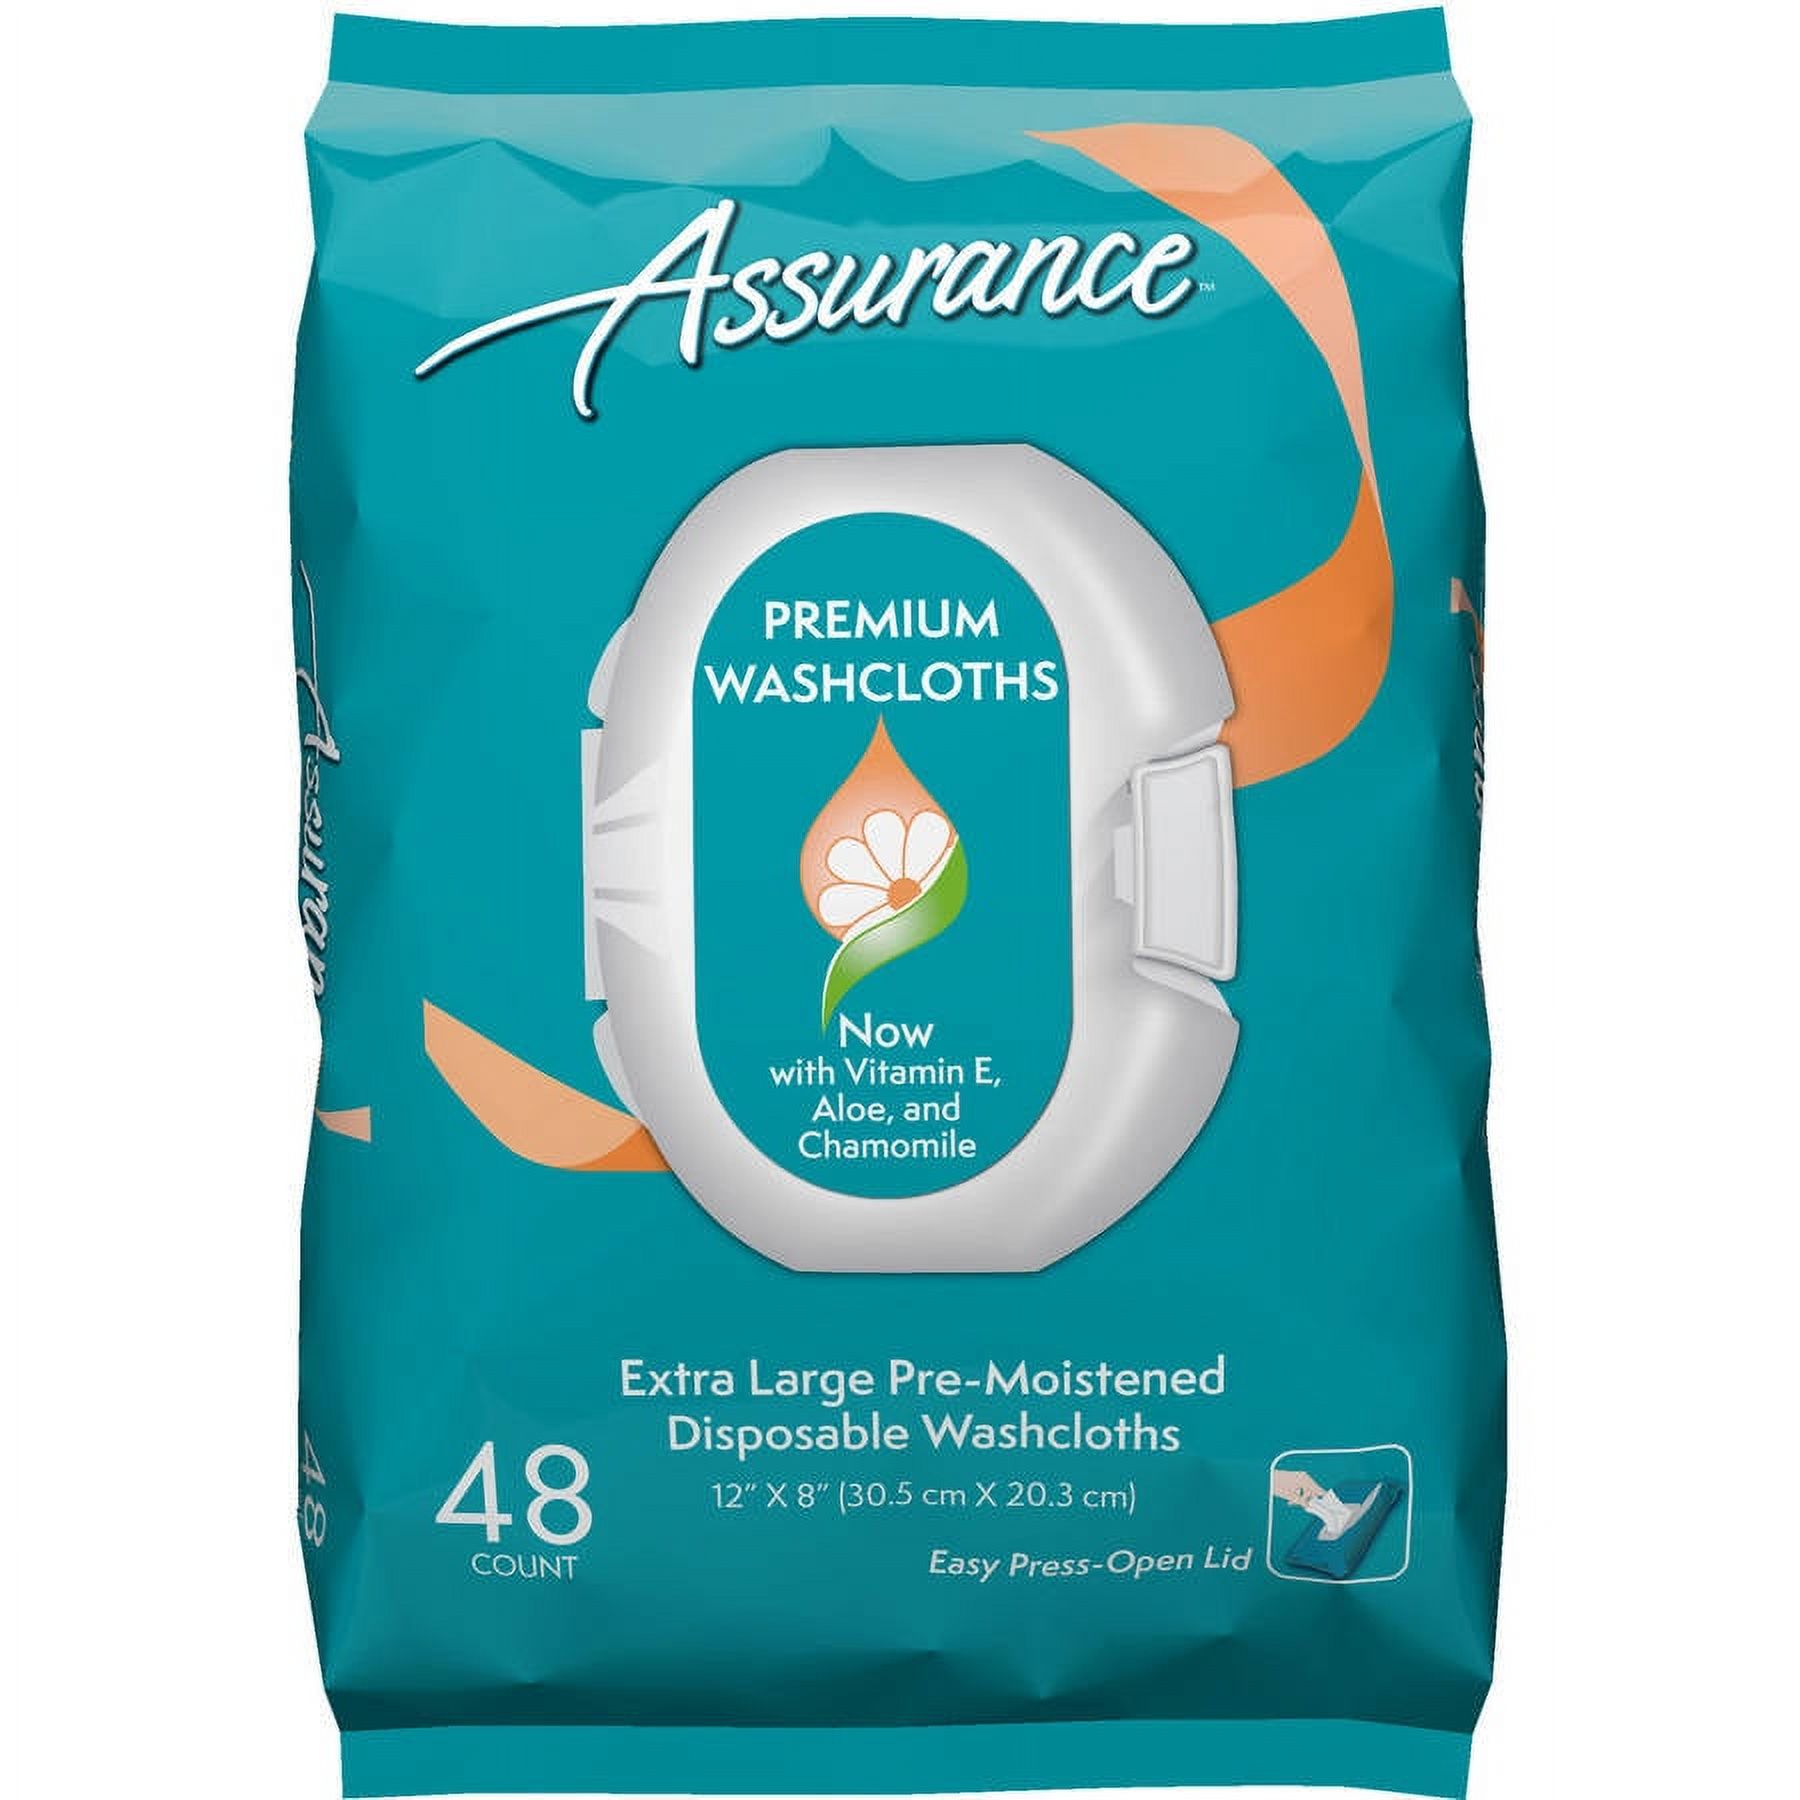 Assurance Premium Pre-Moistened Disposable Washcloths, Extra Large, 48 Ct - image 1 of 5